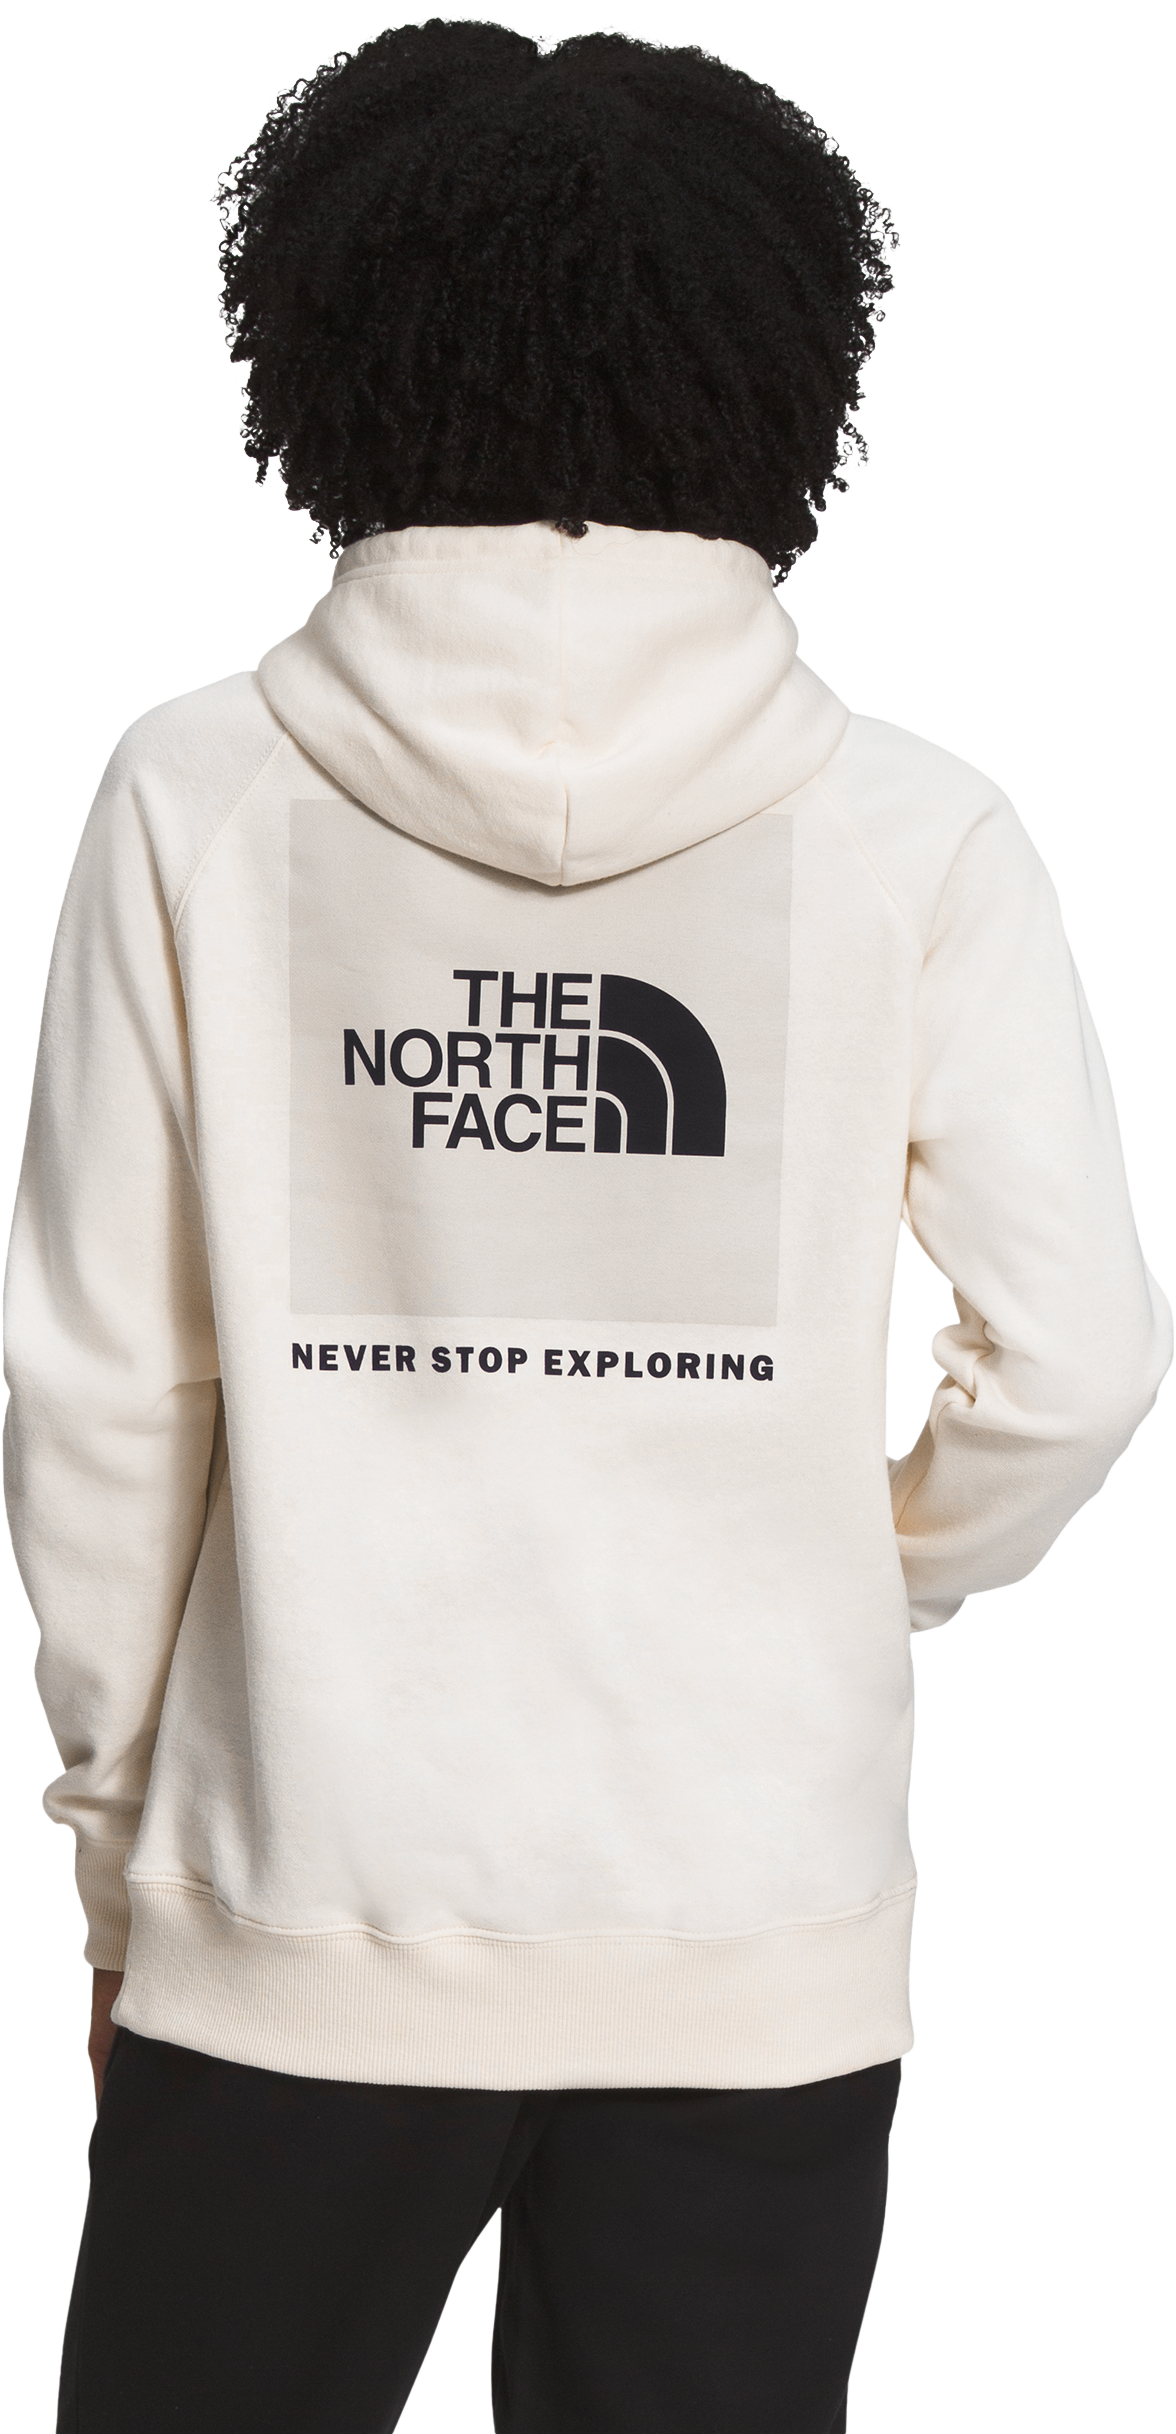 The North Face Box NSE Long-Sleeve Hoodie for Ladies - Gardenia White - XS